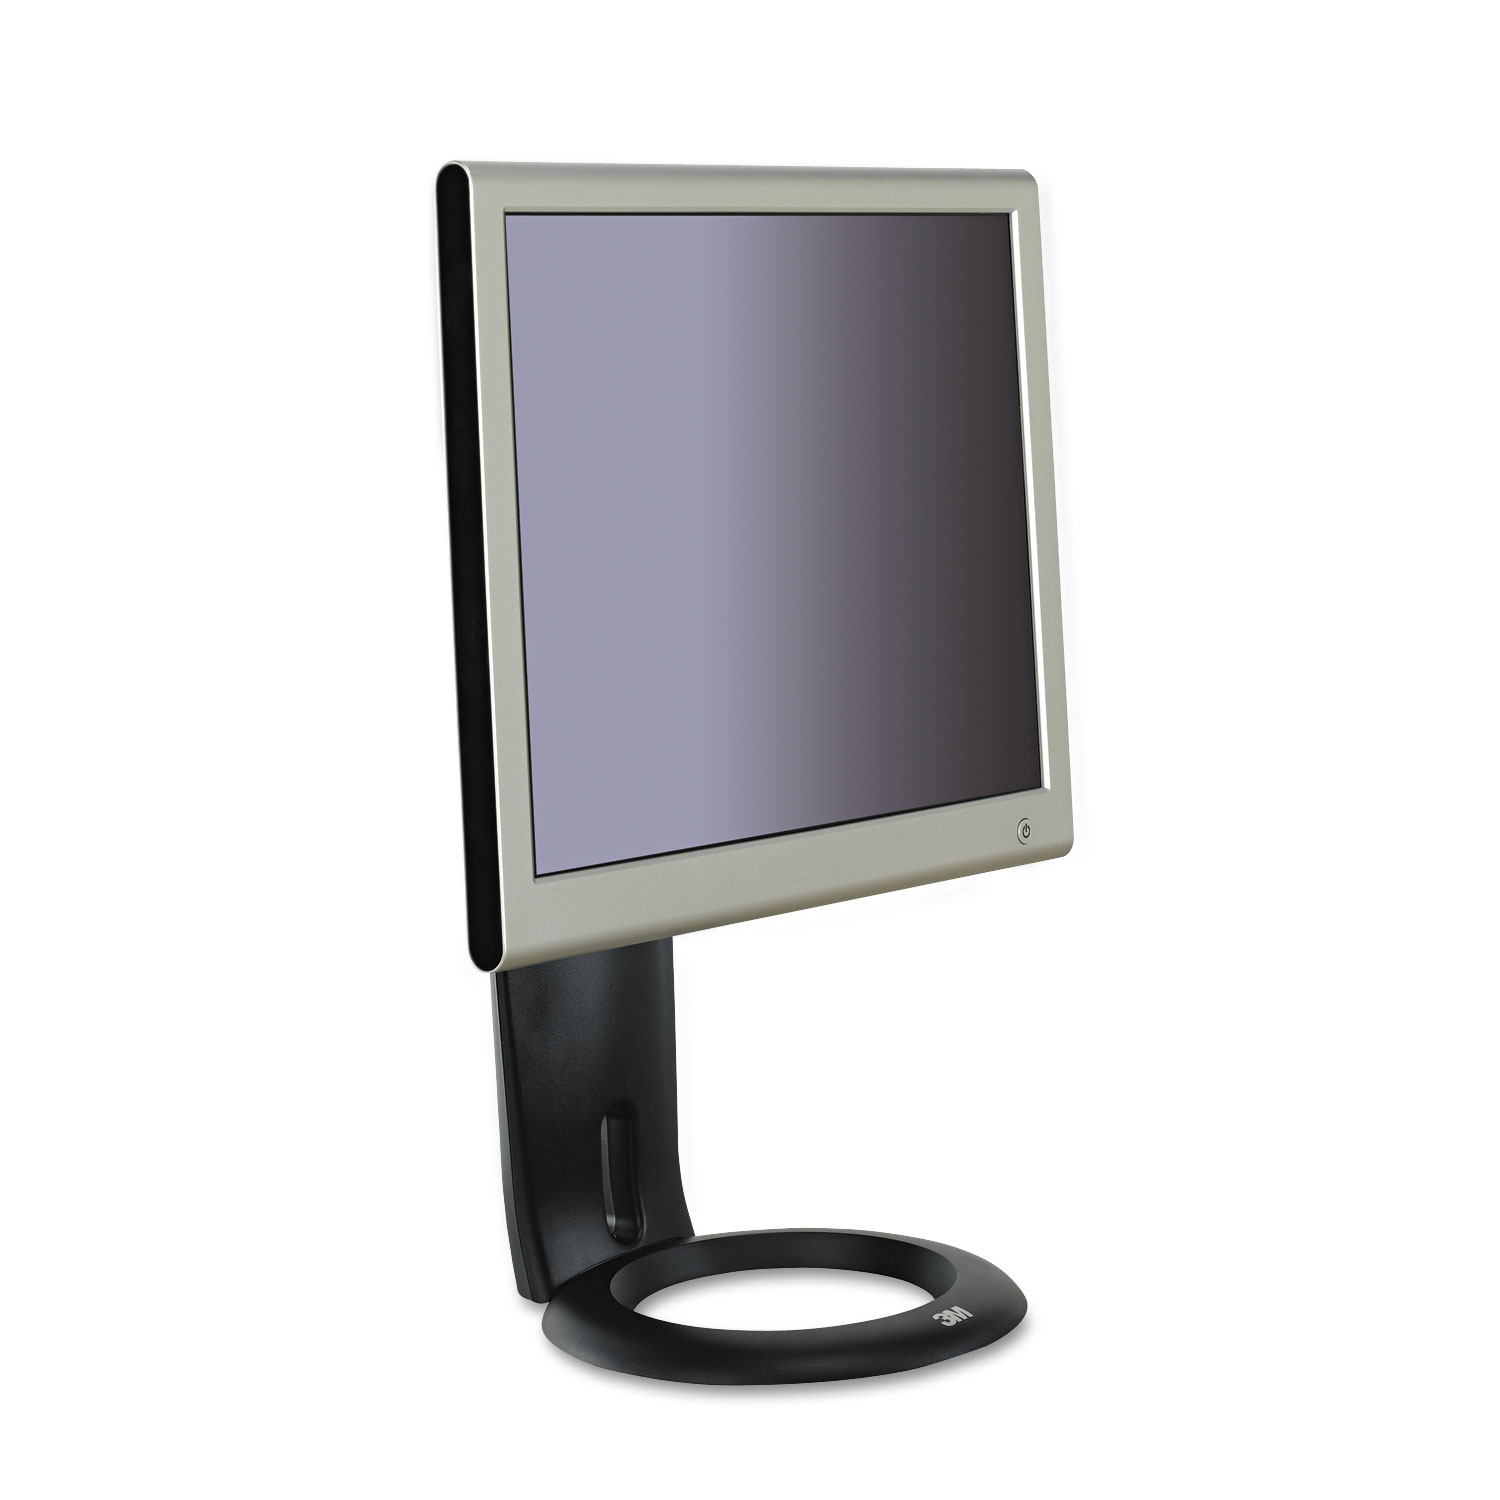  3M MS110MB Easy-Adjust LCD Monitor Stand, 8 1/2 x 5 1/2 x 8 1/2 to 13 1/2, Black (MMMMS110MB) 